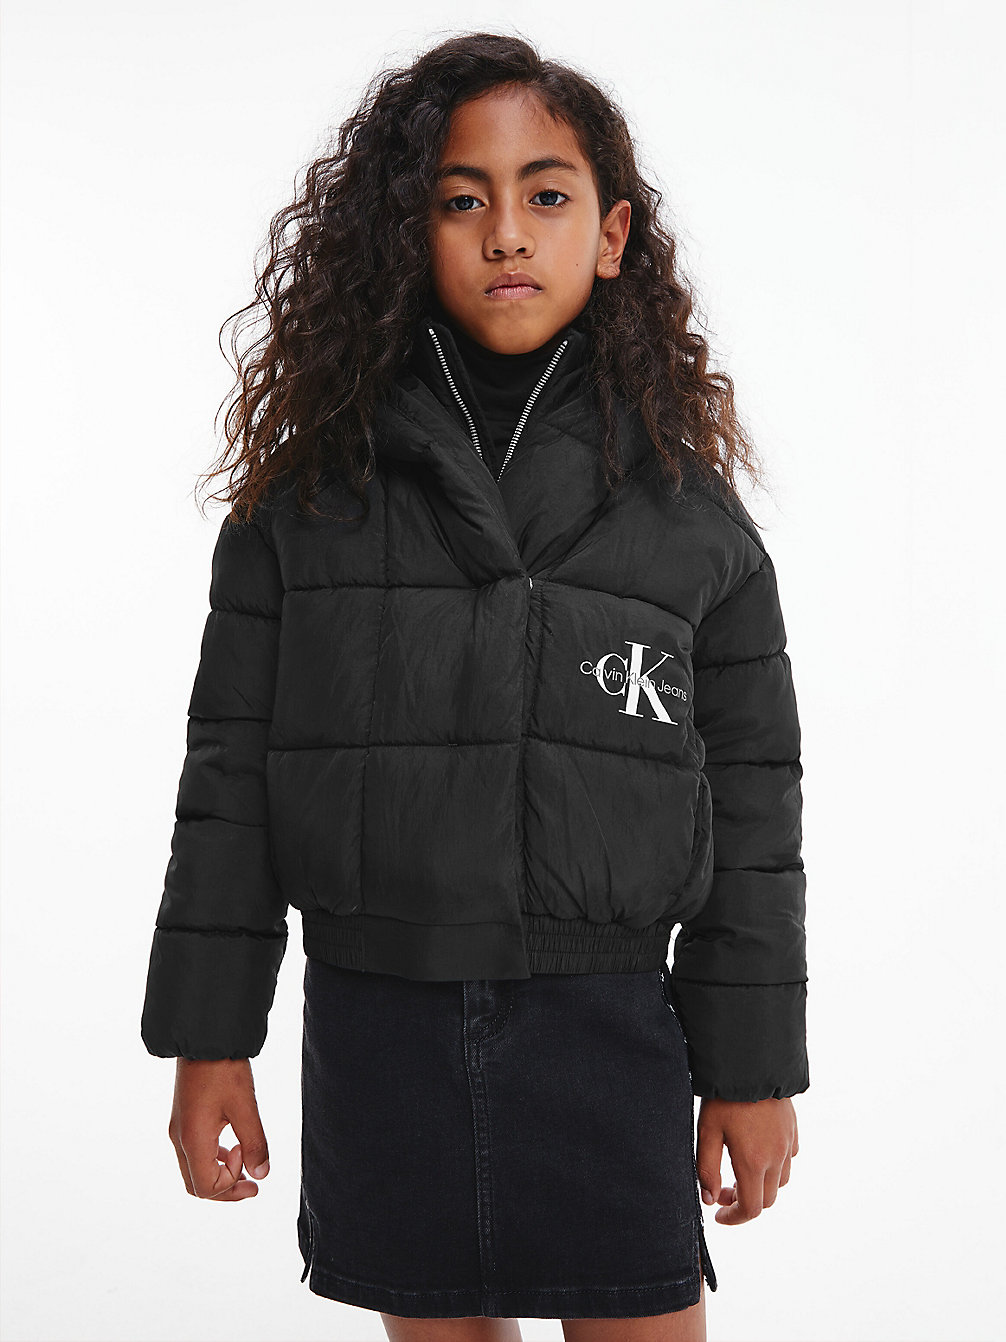 CK BLACK Recycled Polyester Puffer Jacket undefined girls Calvin Klein